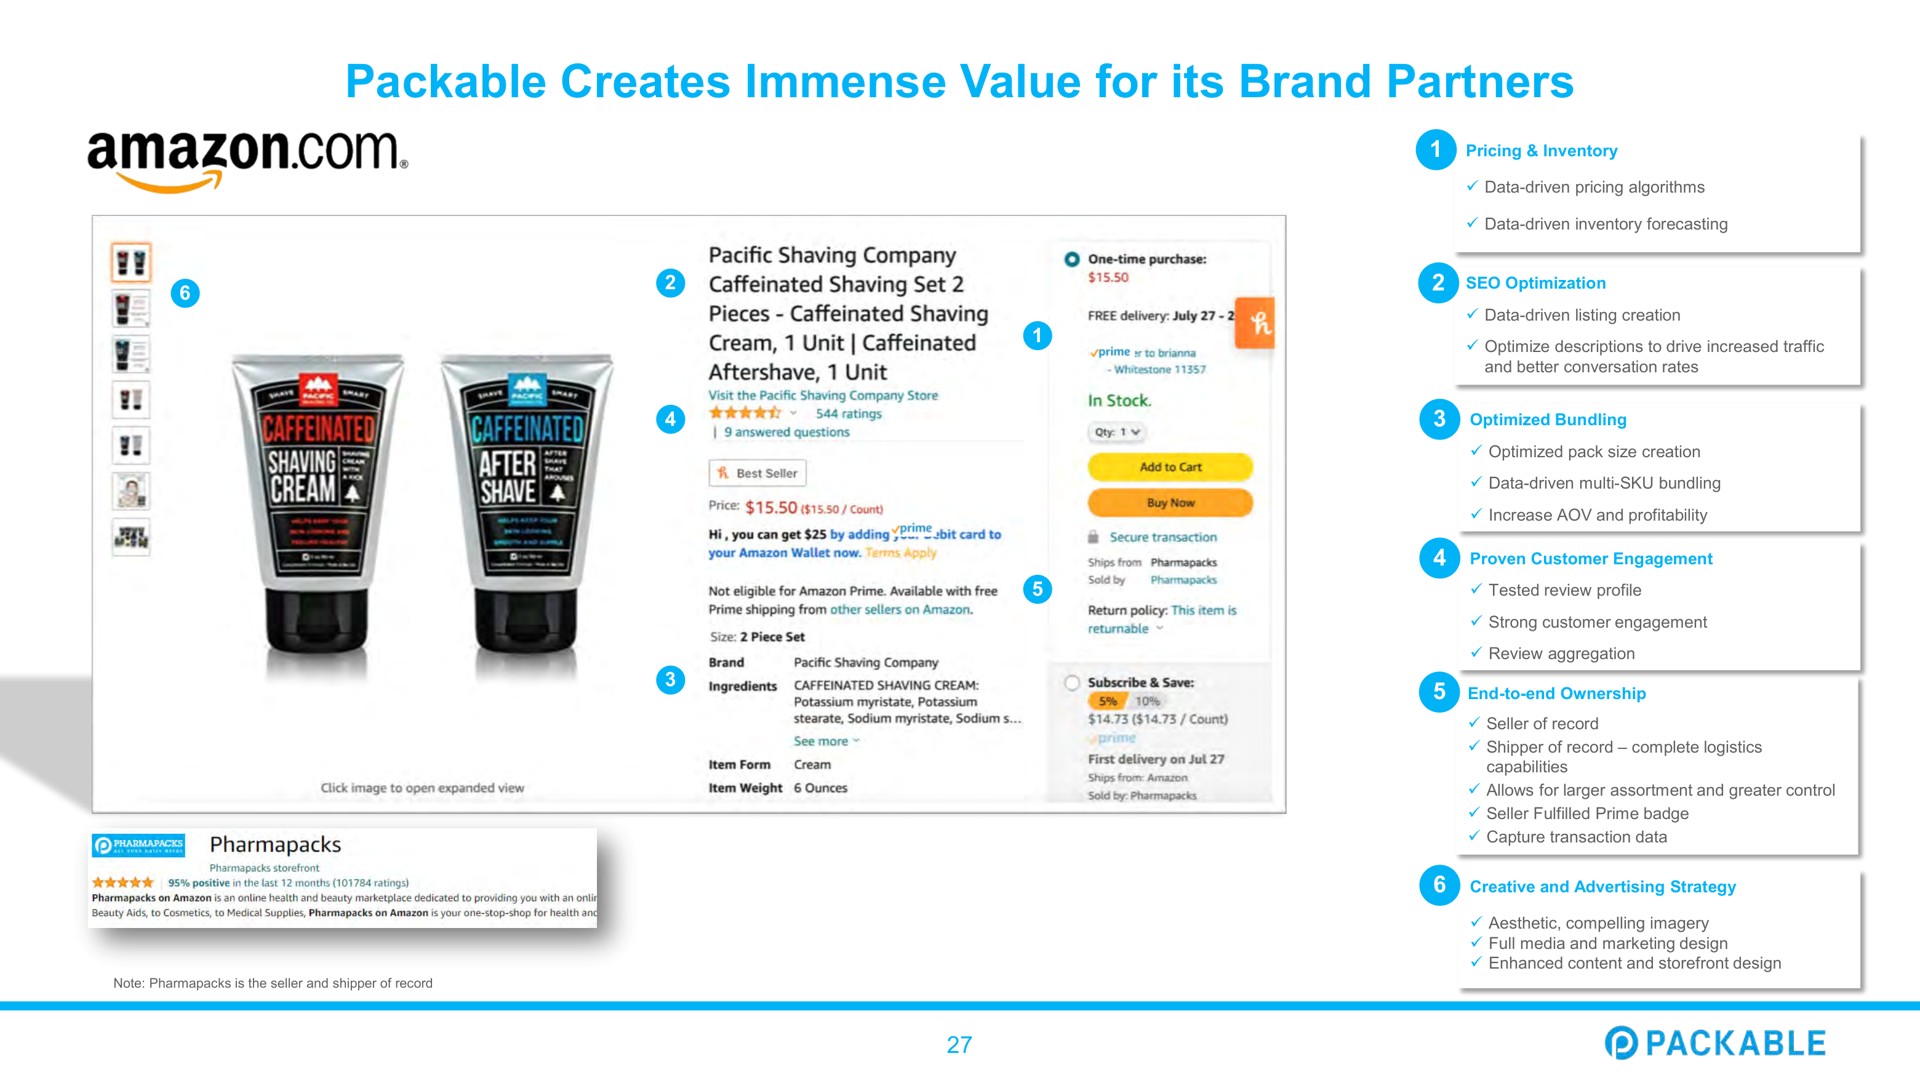 packable creates immense value for its brand partners | Packable